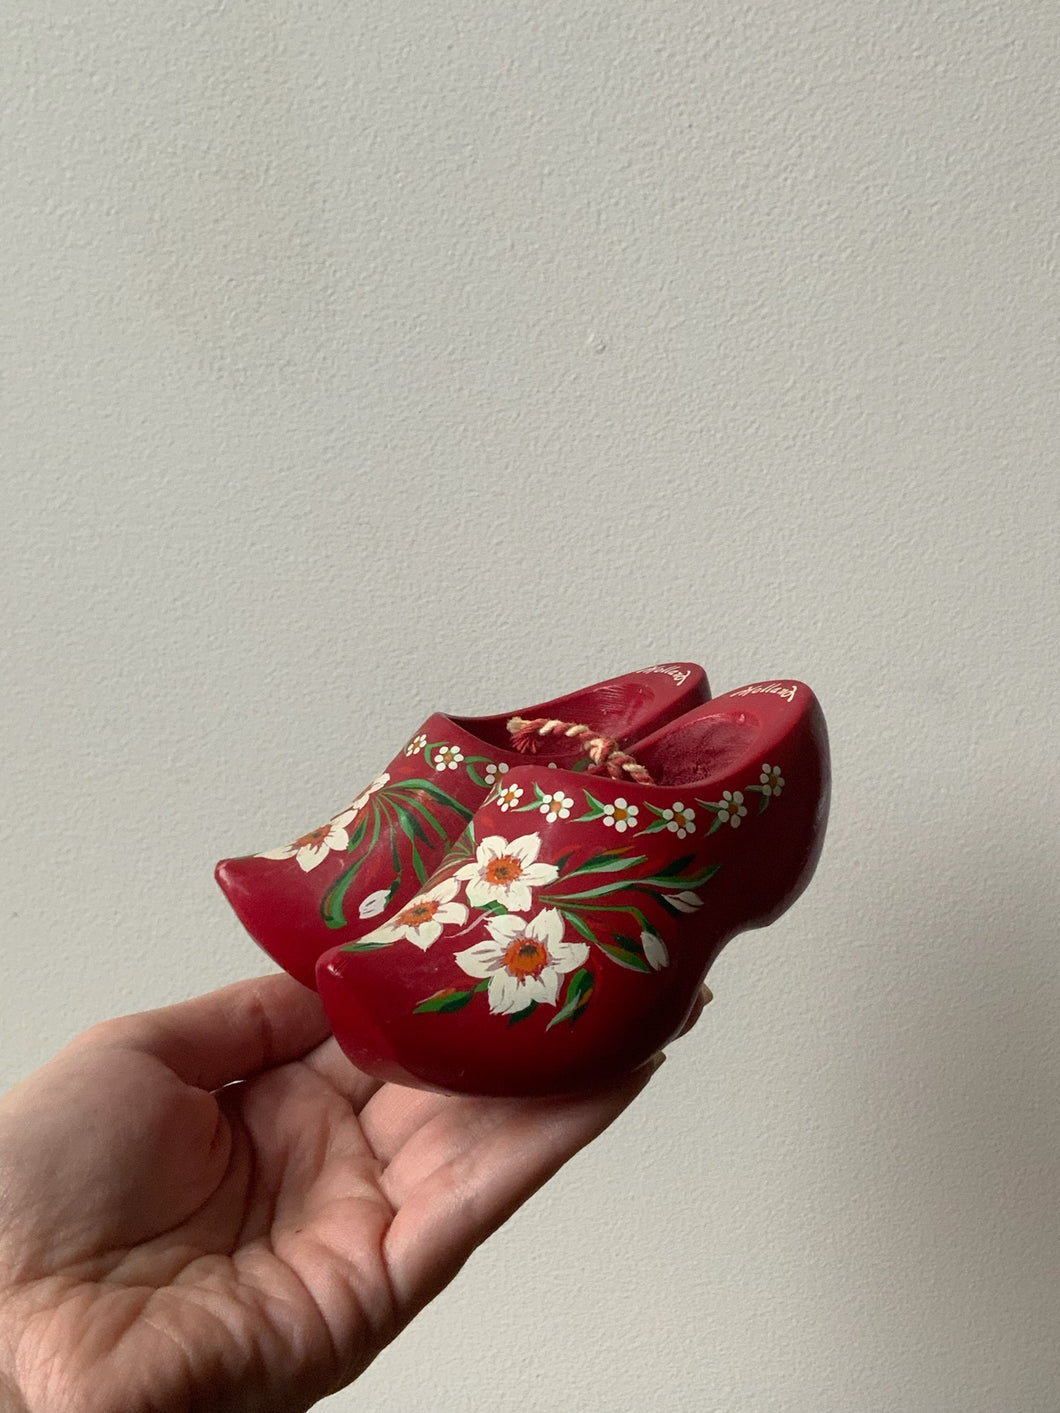 Little Red Clogs